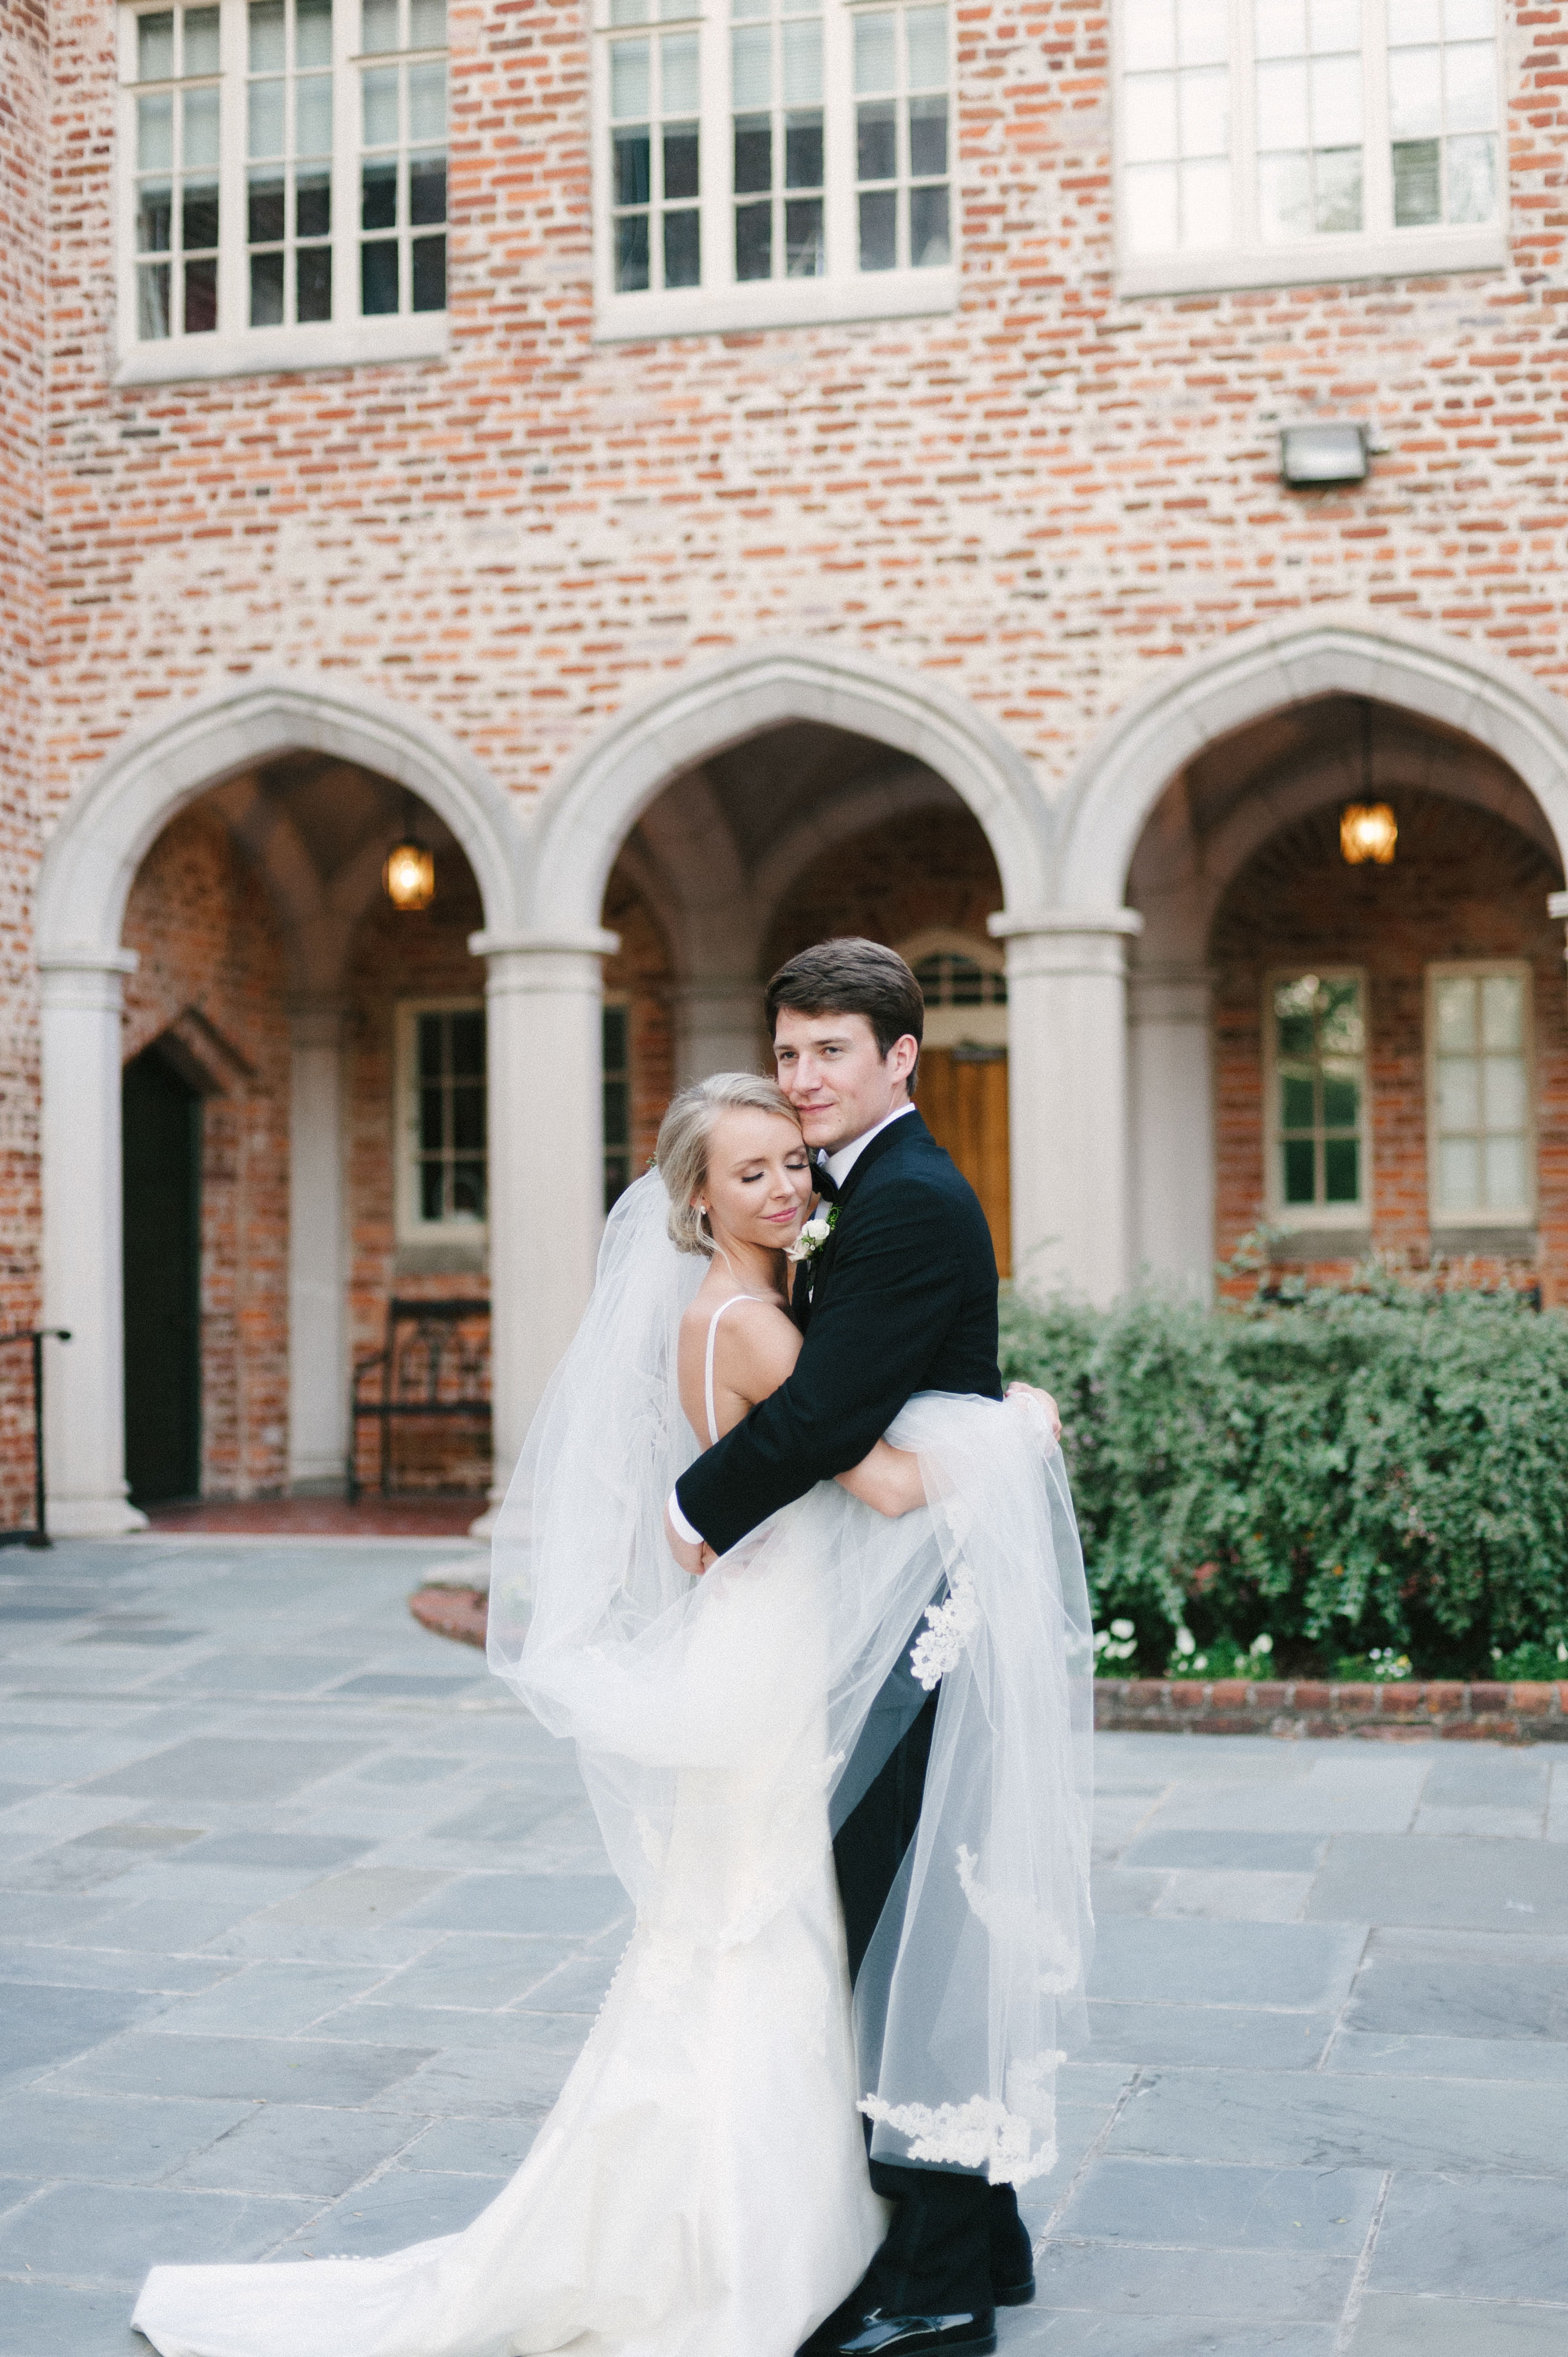 A candid portrait of bride closing her eyes and holding her veil while hugging her brand new groom at First Baptist Church in Selma, AL by Olivia J. Morgan